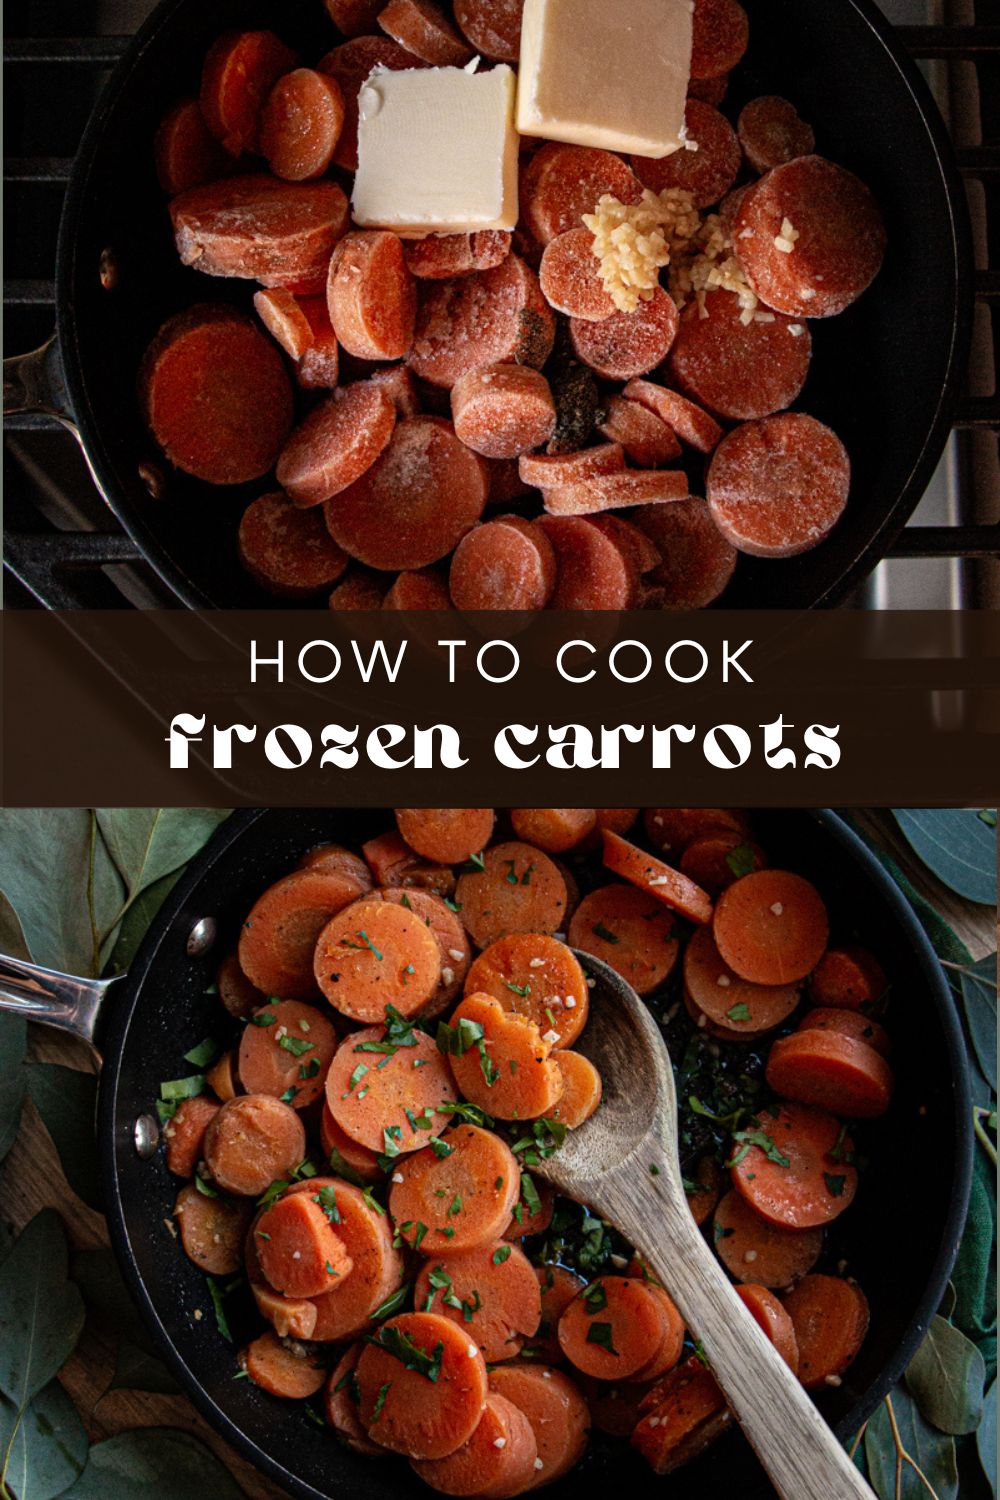 Frozen carrots are a super quick and easy way to get your daily dose of veggies! They're just as delicious as their fresh counterparts but don't require prep work or cutting. When cooked correctly, frozen carrots are juicy, sweet, and flavorful. Plus, they can be used to make various dishes!